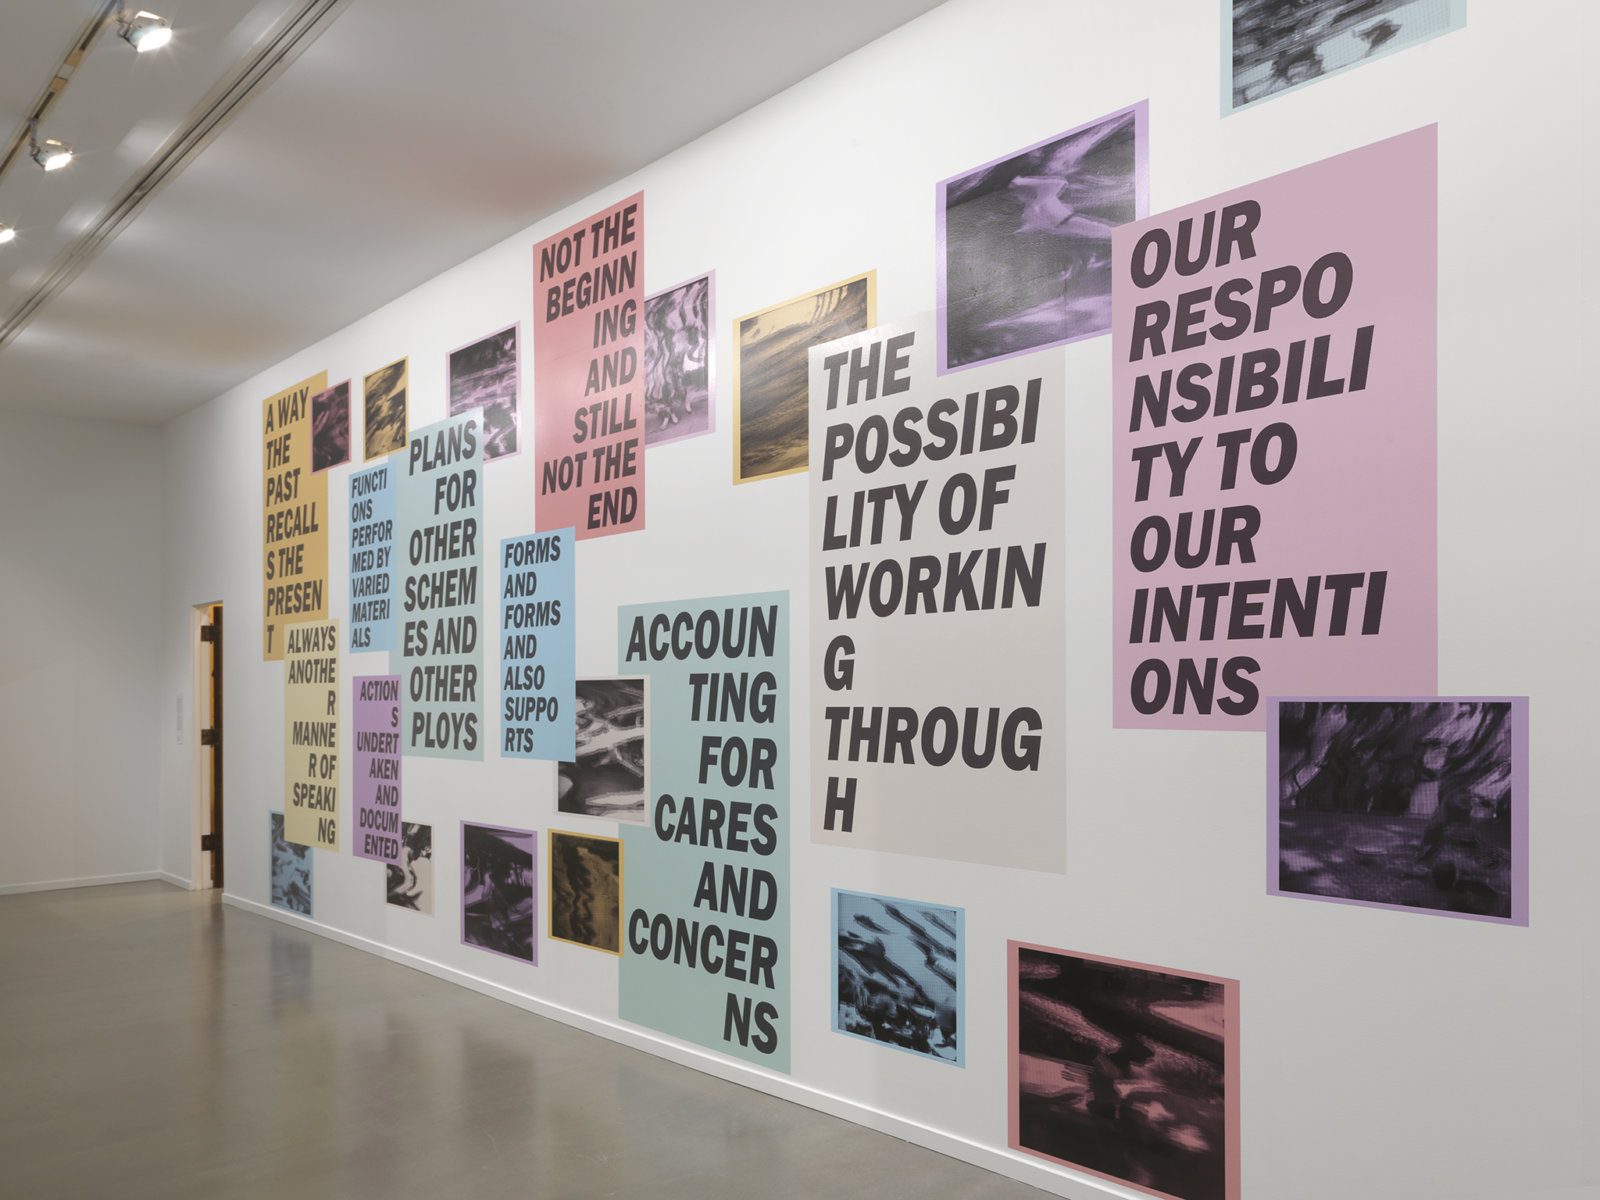 Raymond Boisjoly, Author’s Preface (detail), 2015, 25 solvent based inkjet prints and premixed wallpaper paste, 136 x 361 in. (346 x 917 cm). Installation view, Ambivalent Pleasures, Vancouver Art Gallery, 2016